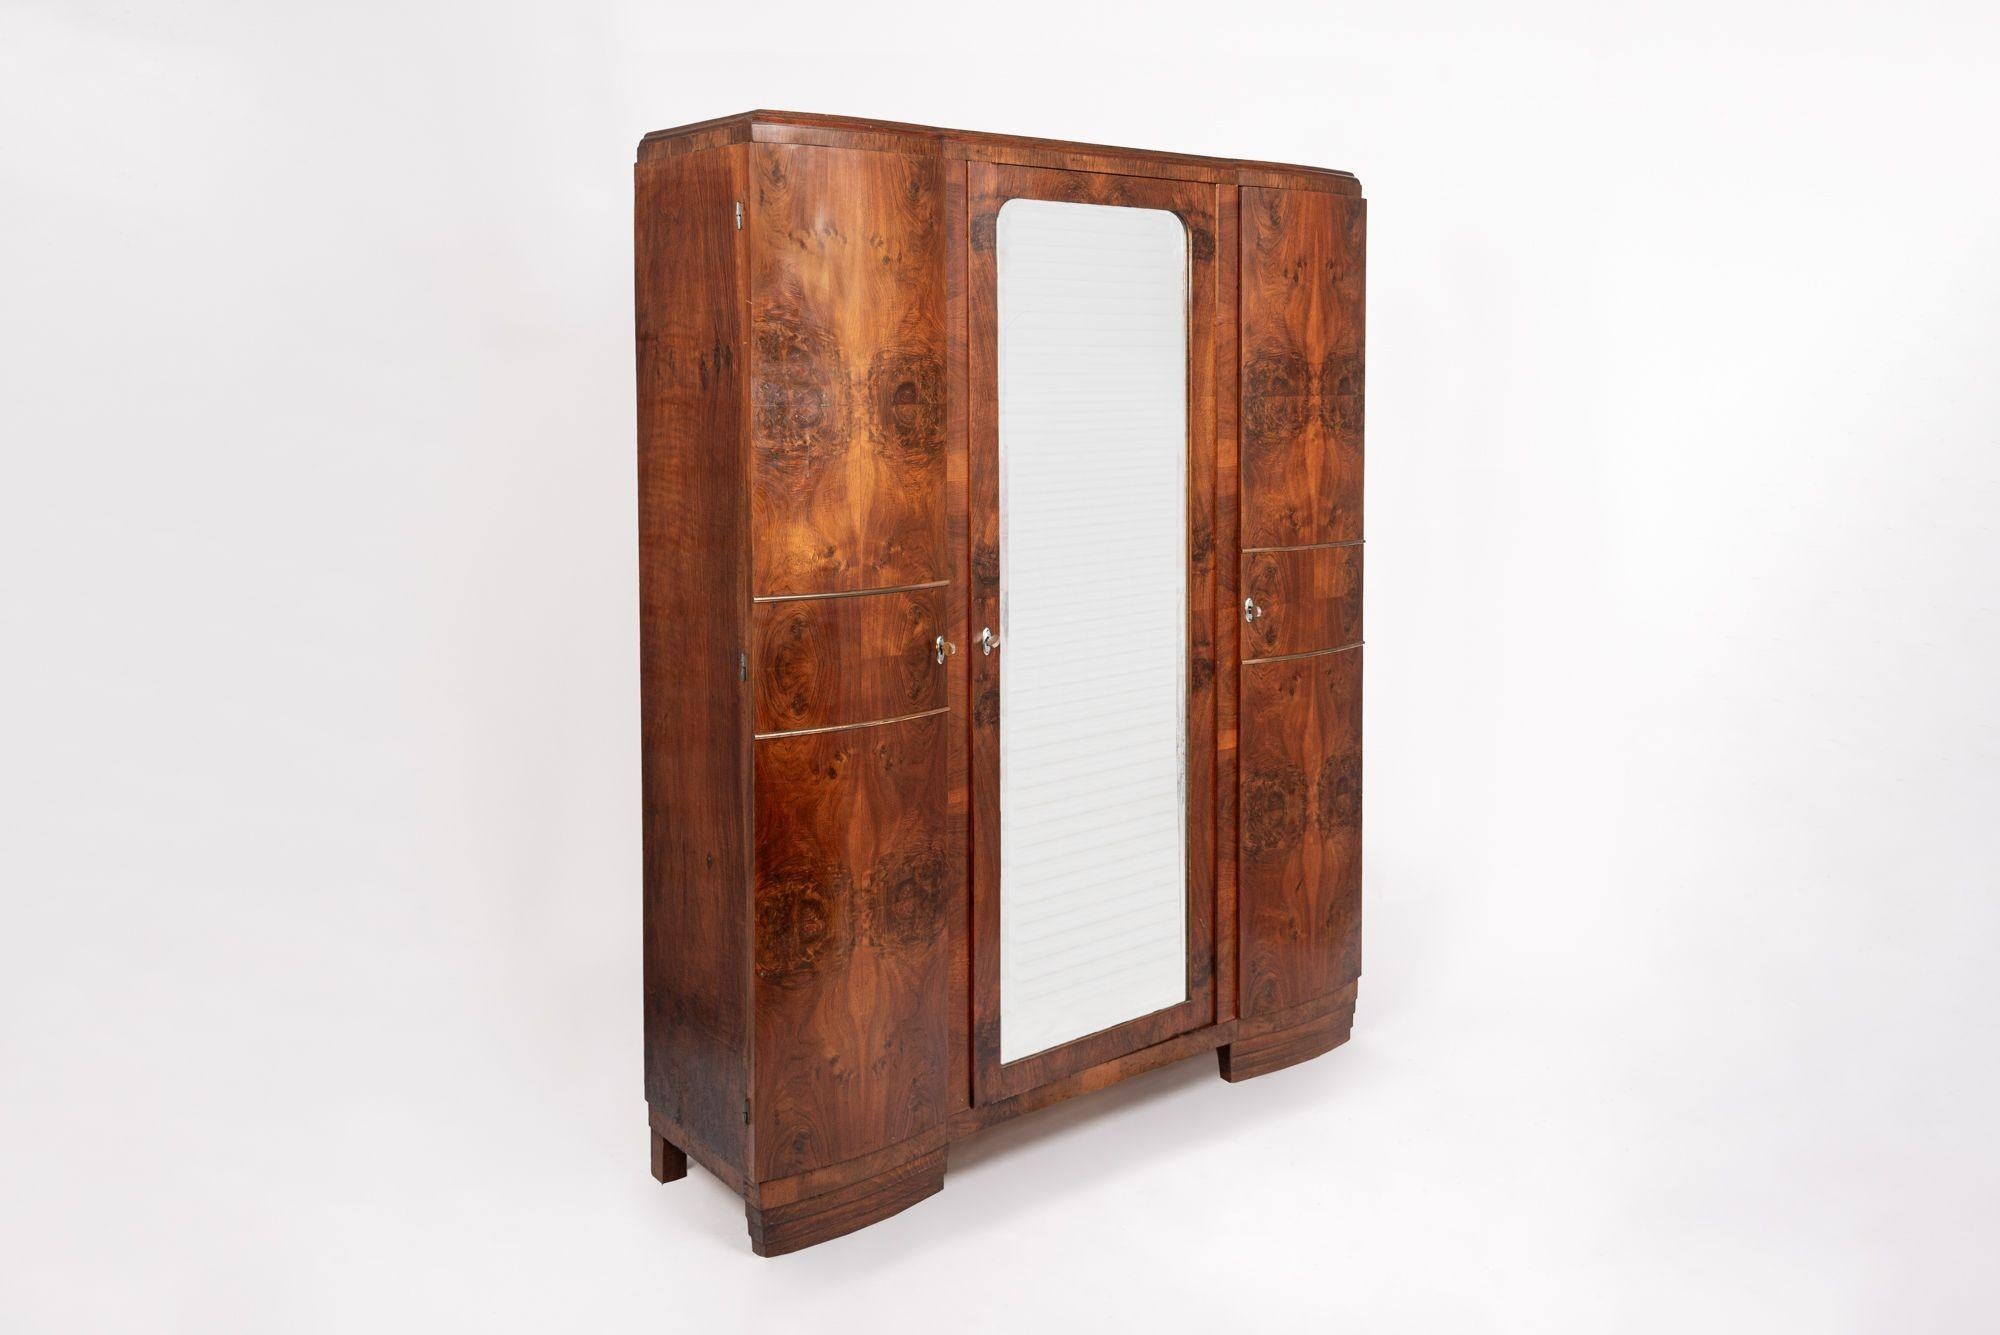 This antique Art Deco walnut wood armoire wardrobe cabinet with interior shelves is circa 1930. It is handcrafted from solid wood and burl wood veneer with beautiful matchbook grain patterning. The armoire features a full-length mirrored center door